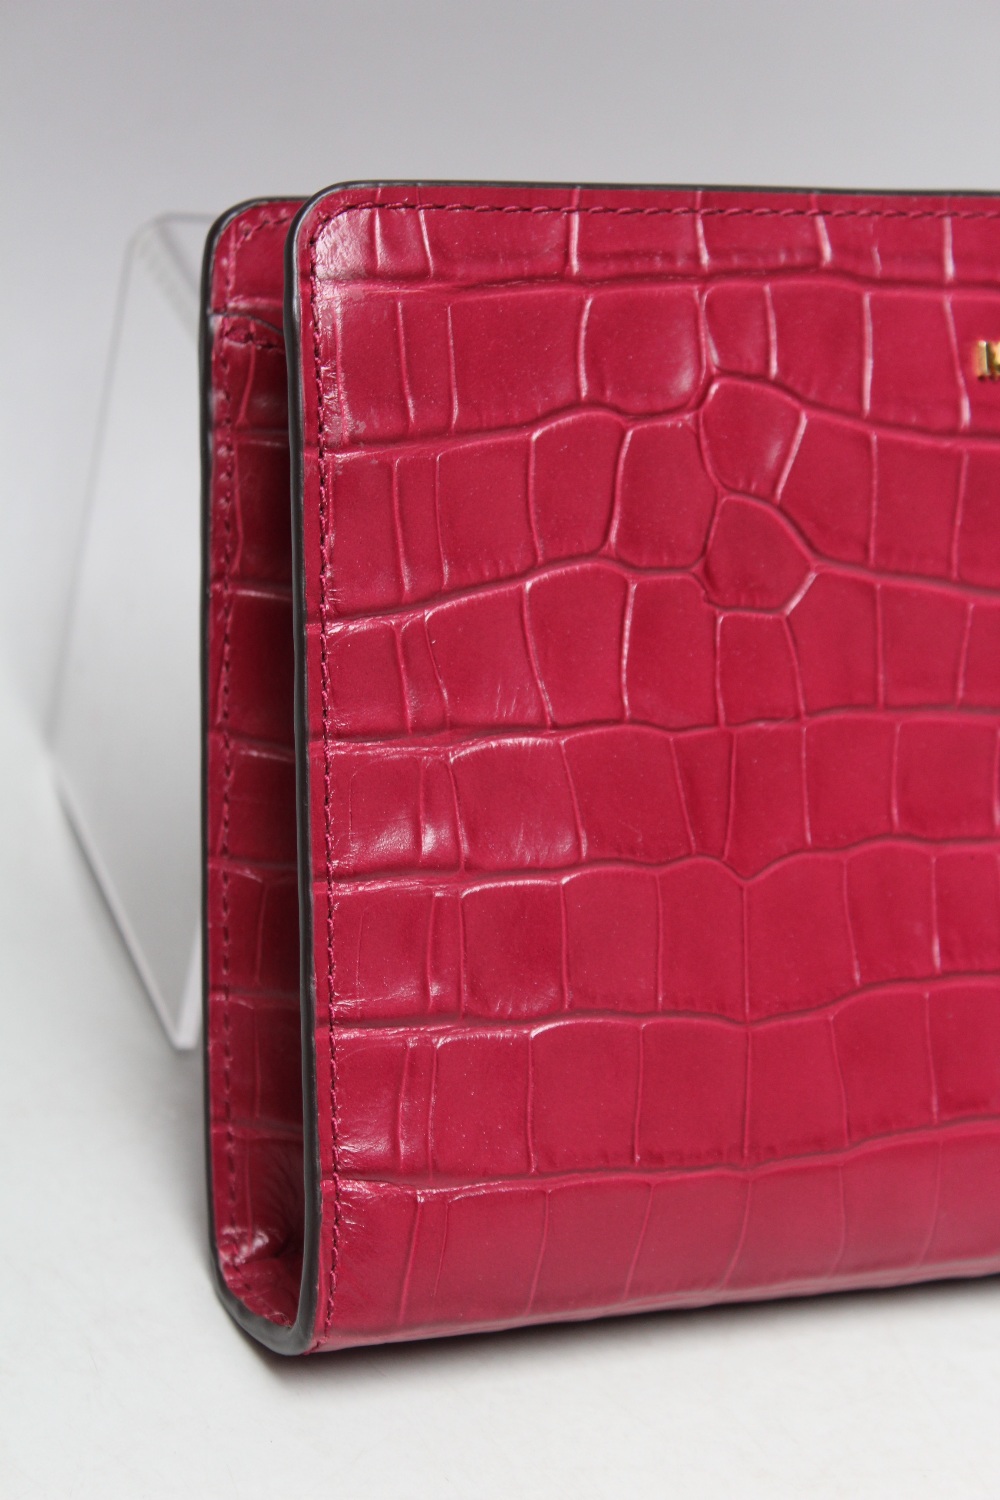 A MICHAEL KORS FUSHIA EMBOSSED LEATHER CROSS BODY CLUTCH BAG, single open pocket to reverse of bag - Image 3 of 4